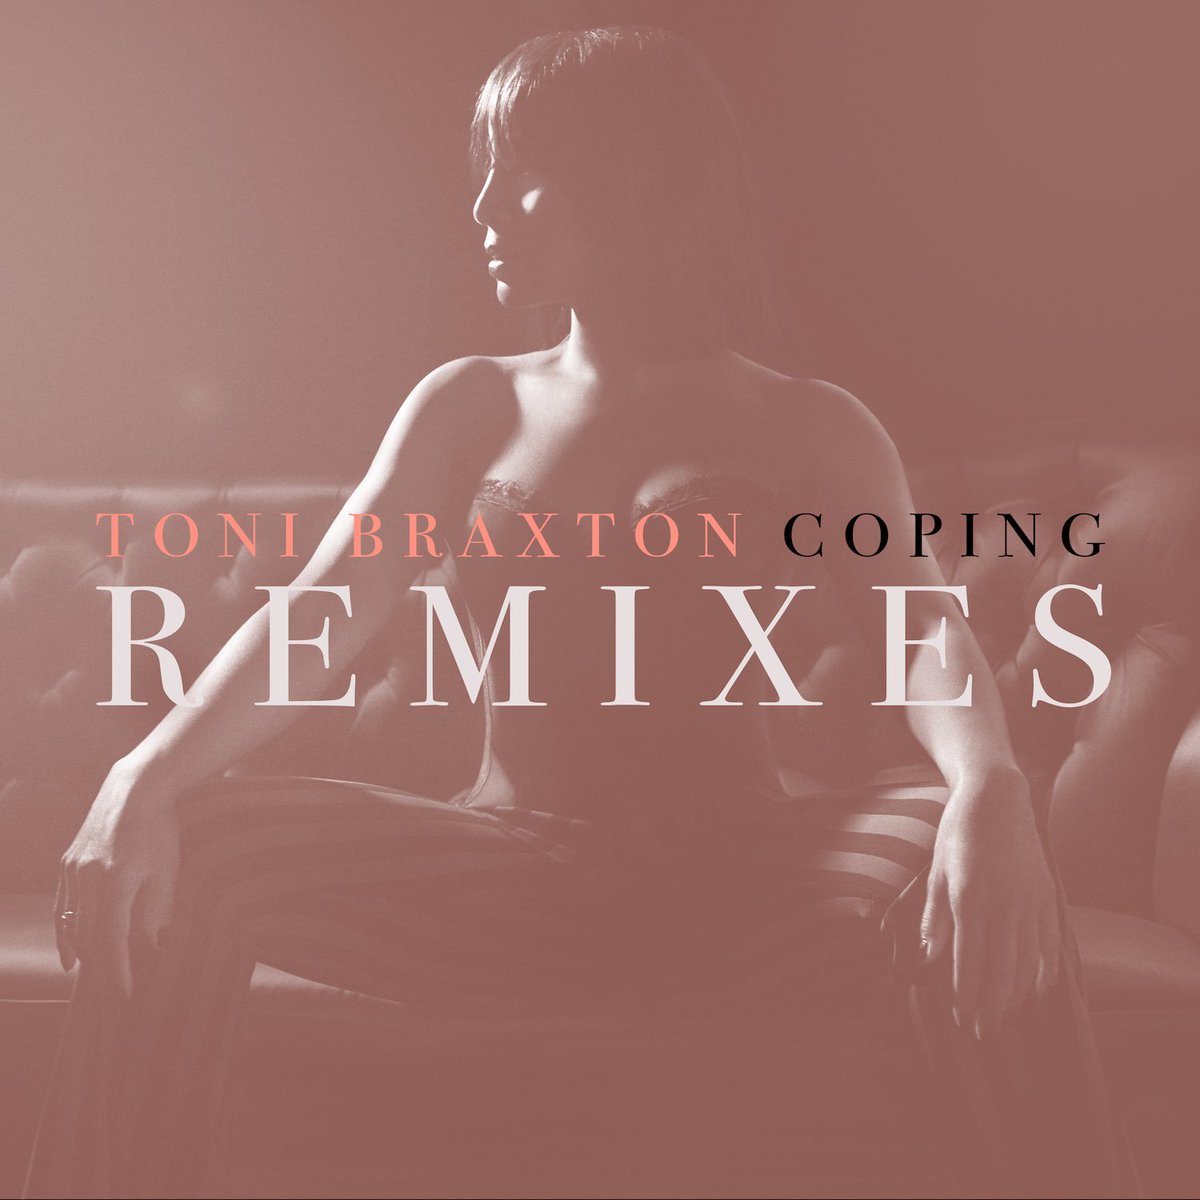 RT @DefJamRecords: .@tonibraxton's Coping remixes out now!
Listen here: https://t.co/2R4NFxYcXh https://t.co/b7lcOpaSOc